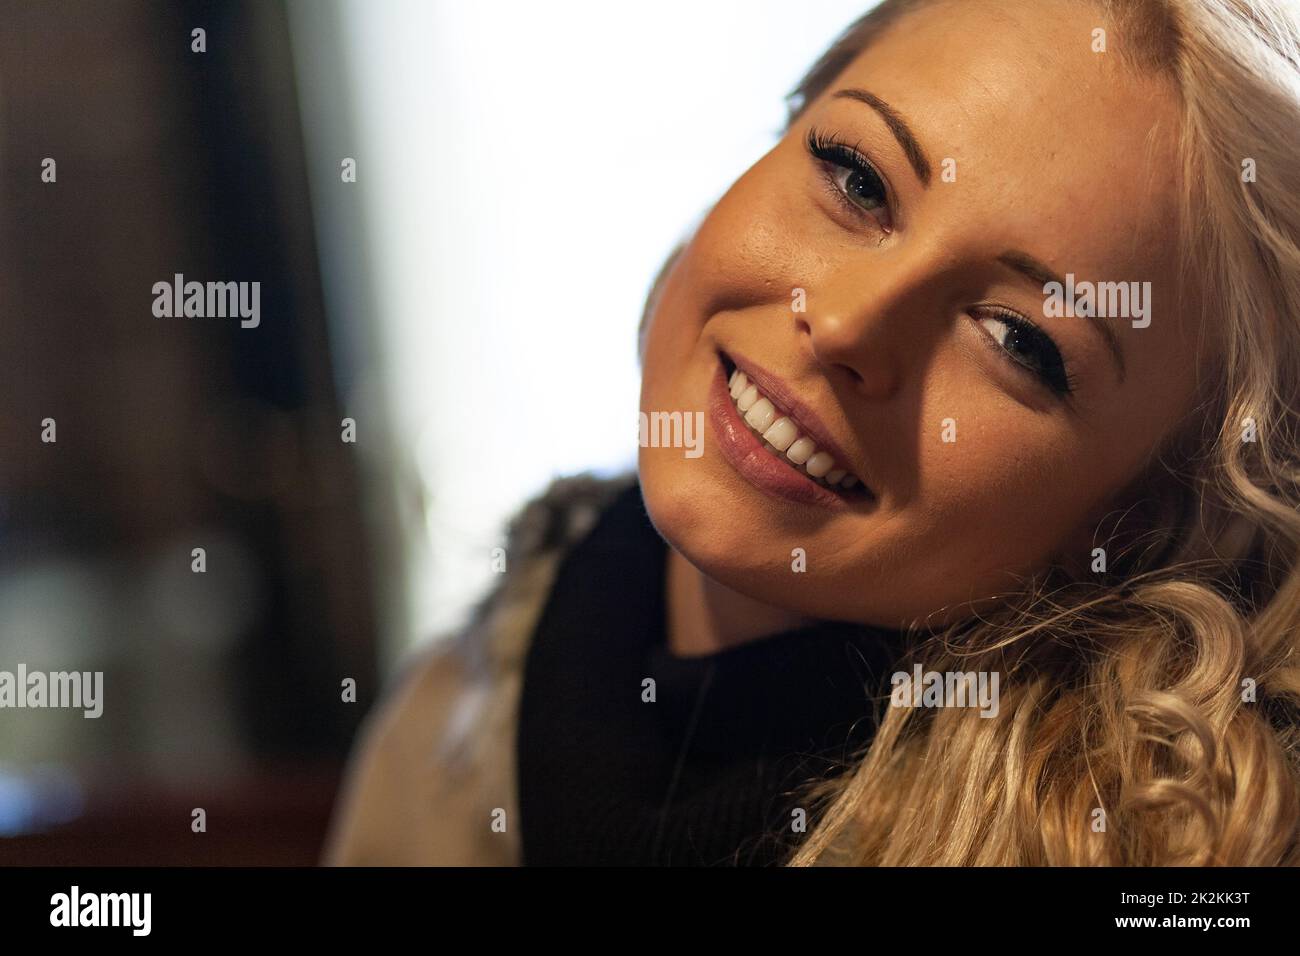 Pretty young blond woman with a sweet smile Stock Photo